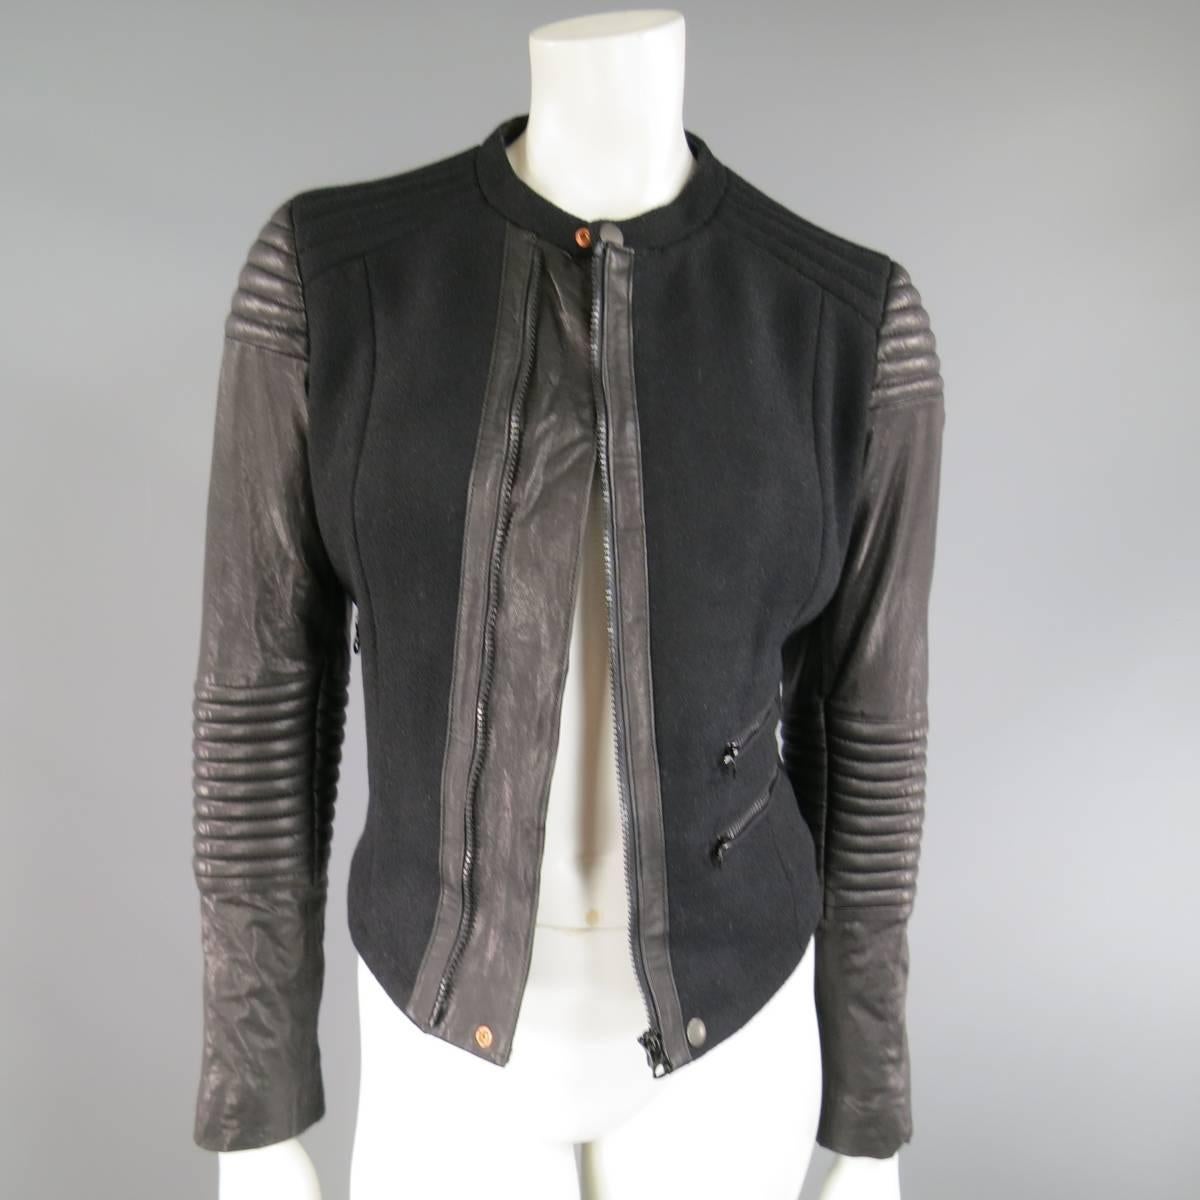 Fashion biker jacket by PAUL SMITH in a black wool blend with band snap collar, triple zip pockets, quilted shoulders, and padded leather sleeves.
 
Excellent Pre-Owned Condition.
No Marked Size.
 
Measurements:
 
Shoulder: 15.5 in.
Bust: 38